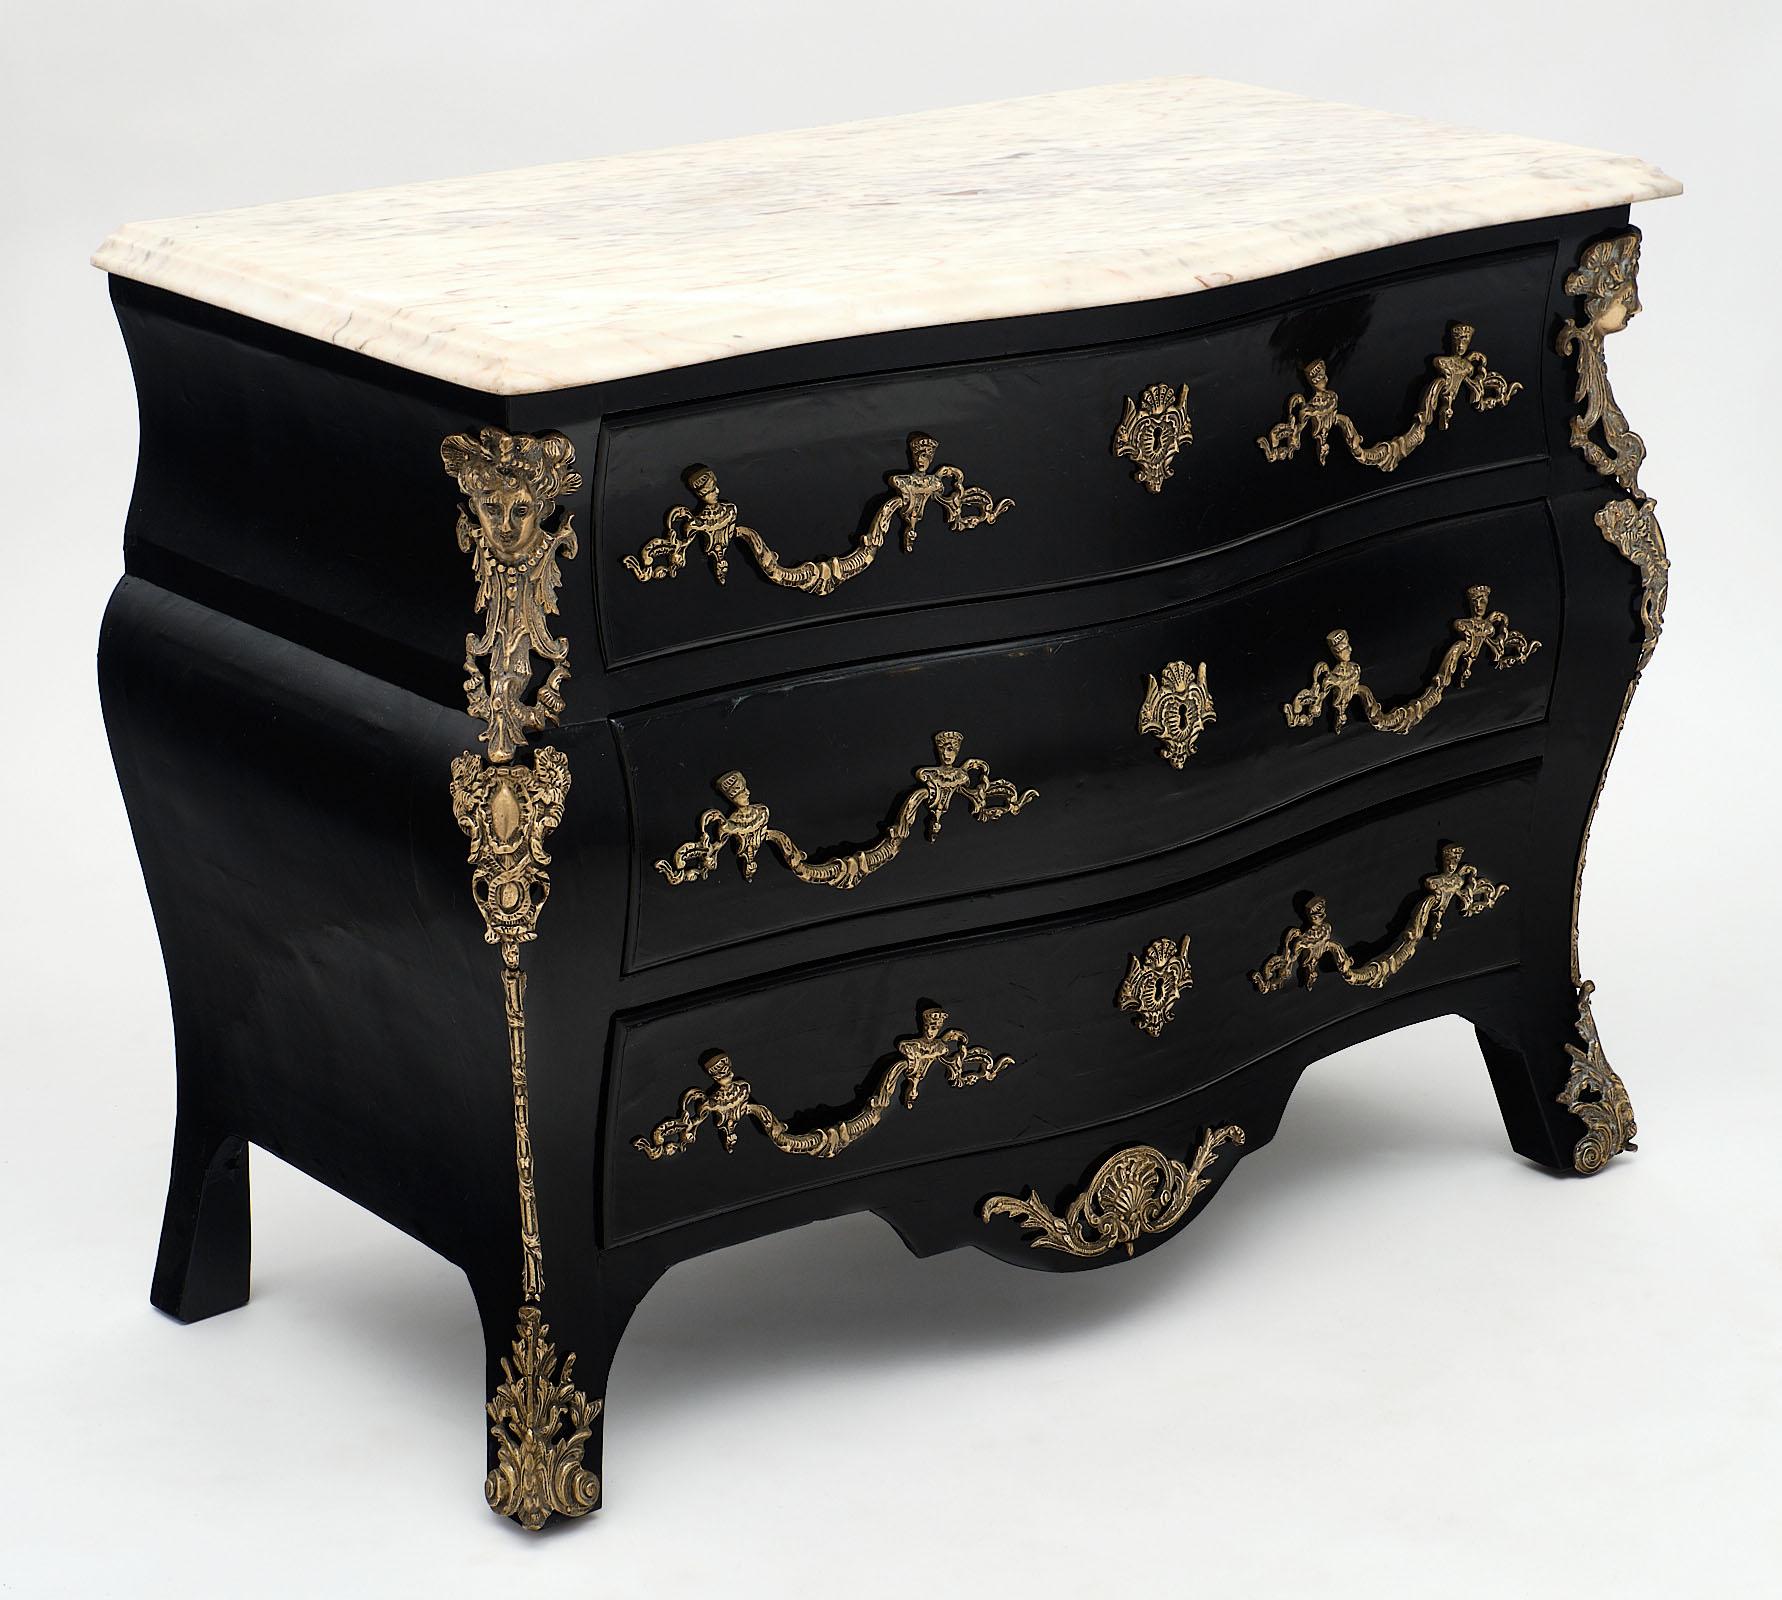 French antique Régence chest of drawers. This beautiful “commode serpentine” has striking; rich ornamentation of finely case gilded bronzes throughout. It has been ebonized and finished with a French polish finish. There are three dovetailed drawers